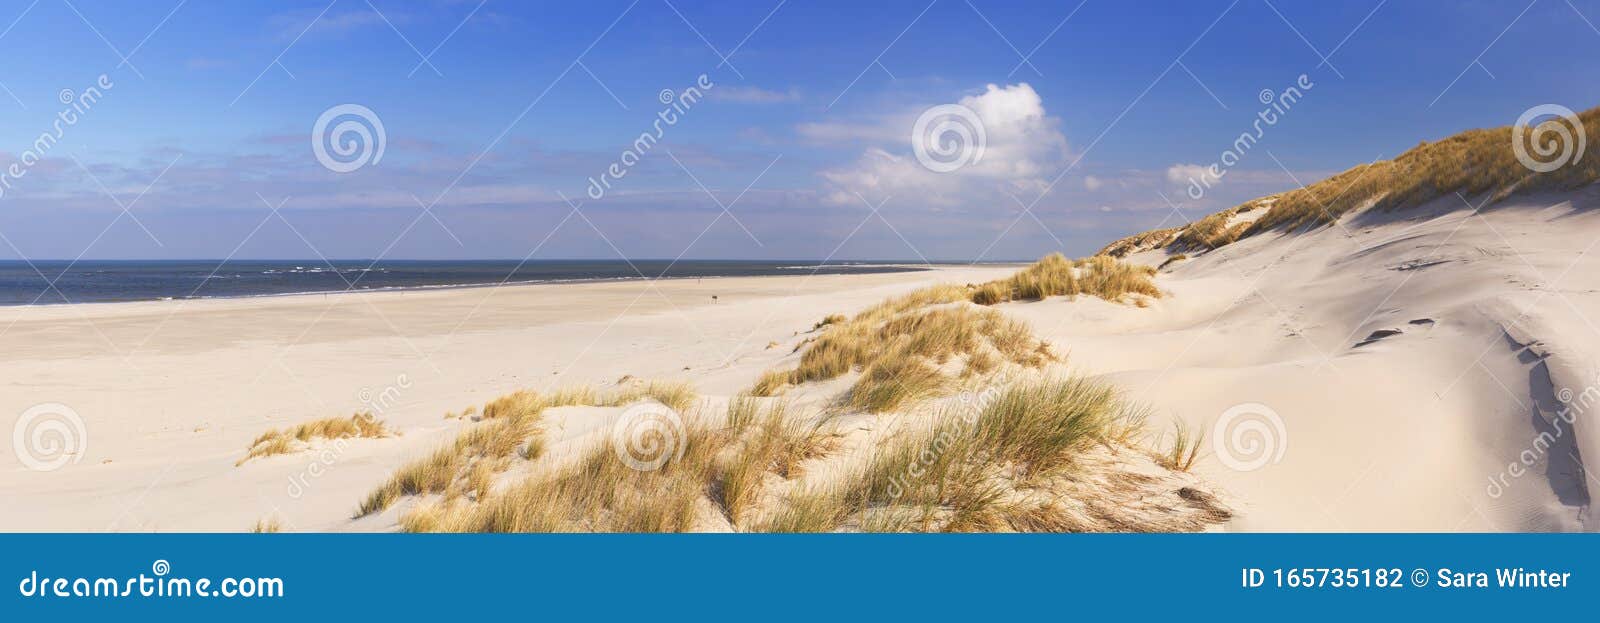 endless beach on the island of terschelling in the netherlands